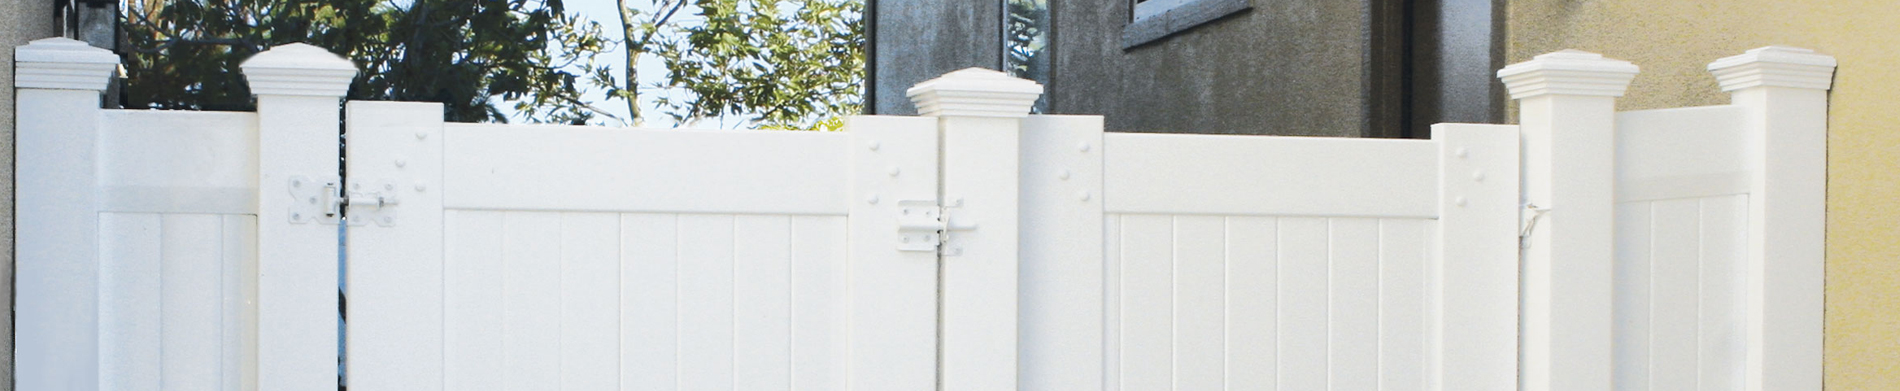 Install a vinyl fence around your home, and do not worry about reinvestment